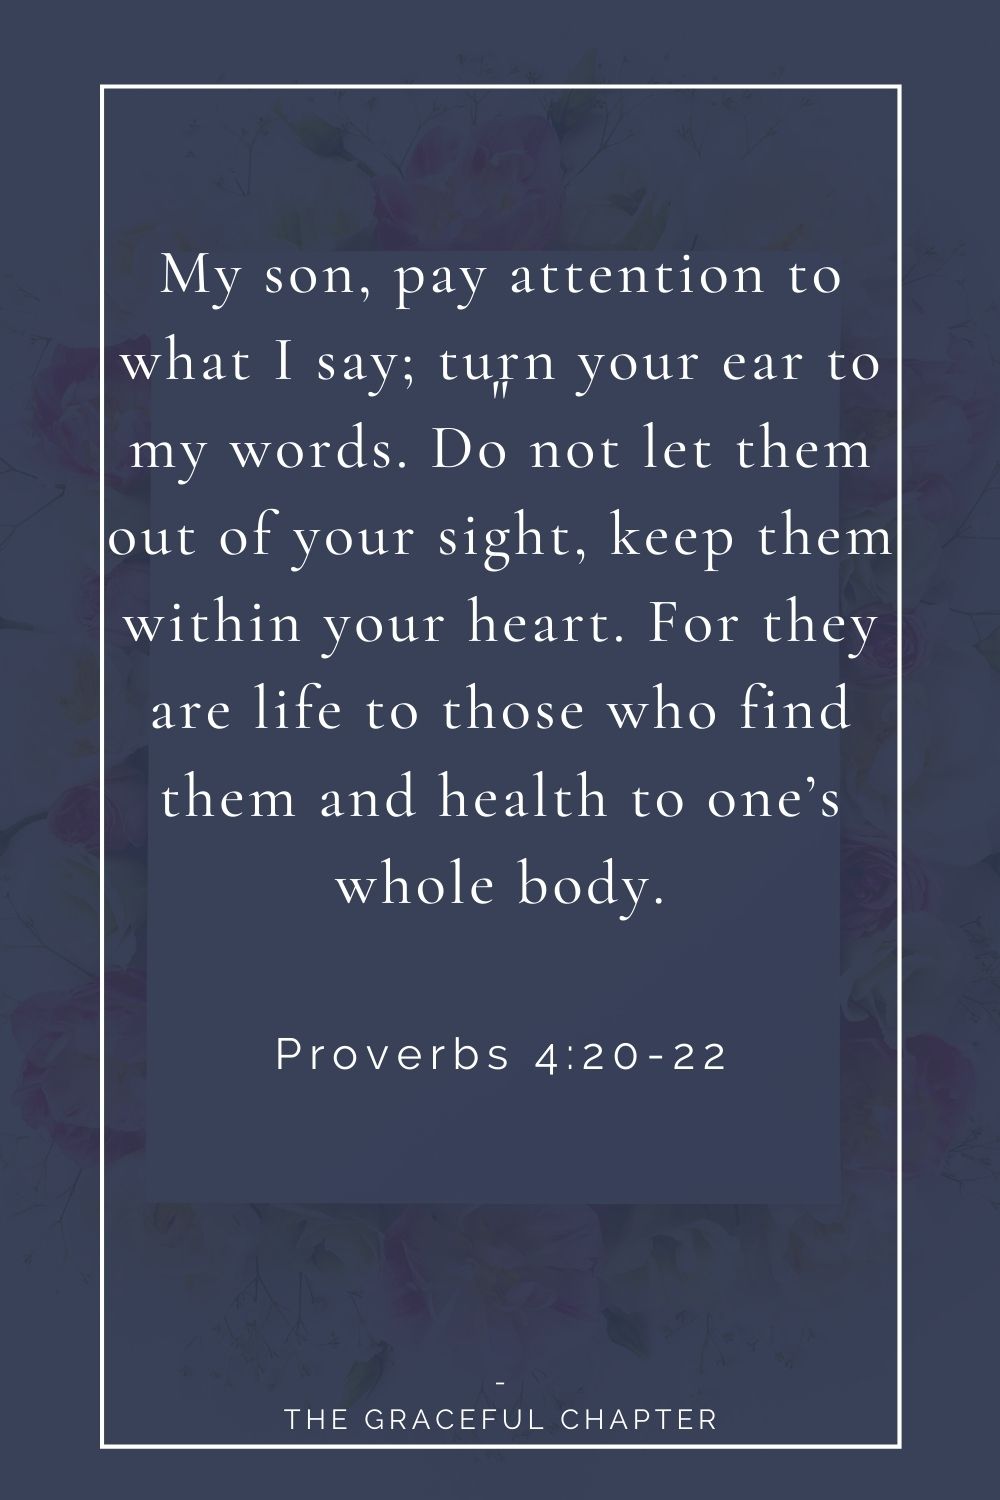 My son, pay attention to what I say; turn your ear to my words. Do not let them out of your sight, keep them within your heart. For they are life to those who find them and health to one’s whole body. Proverbs 4:20-22